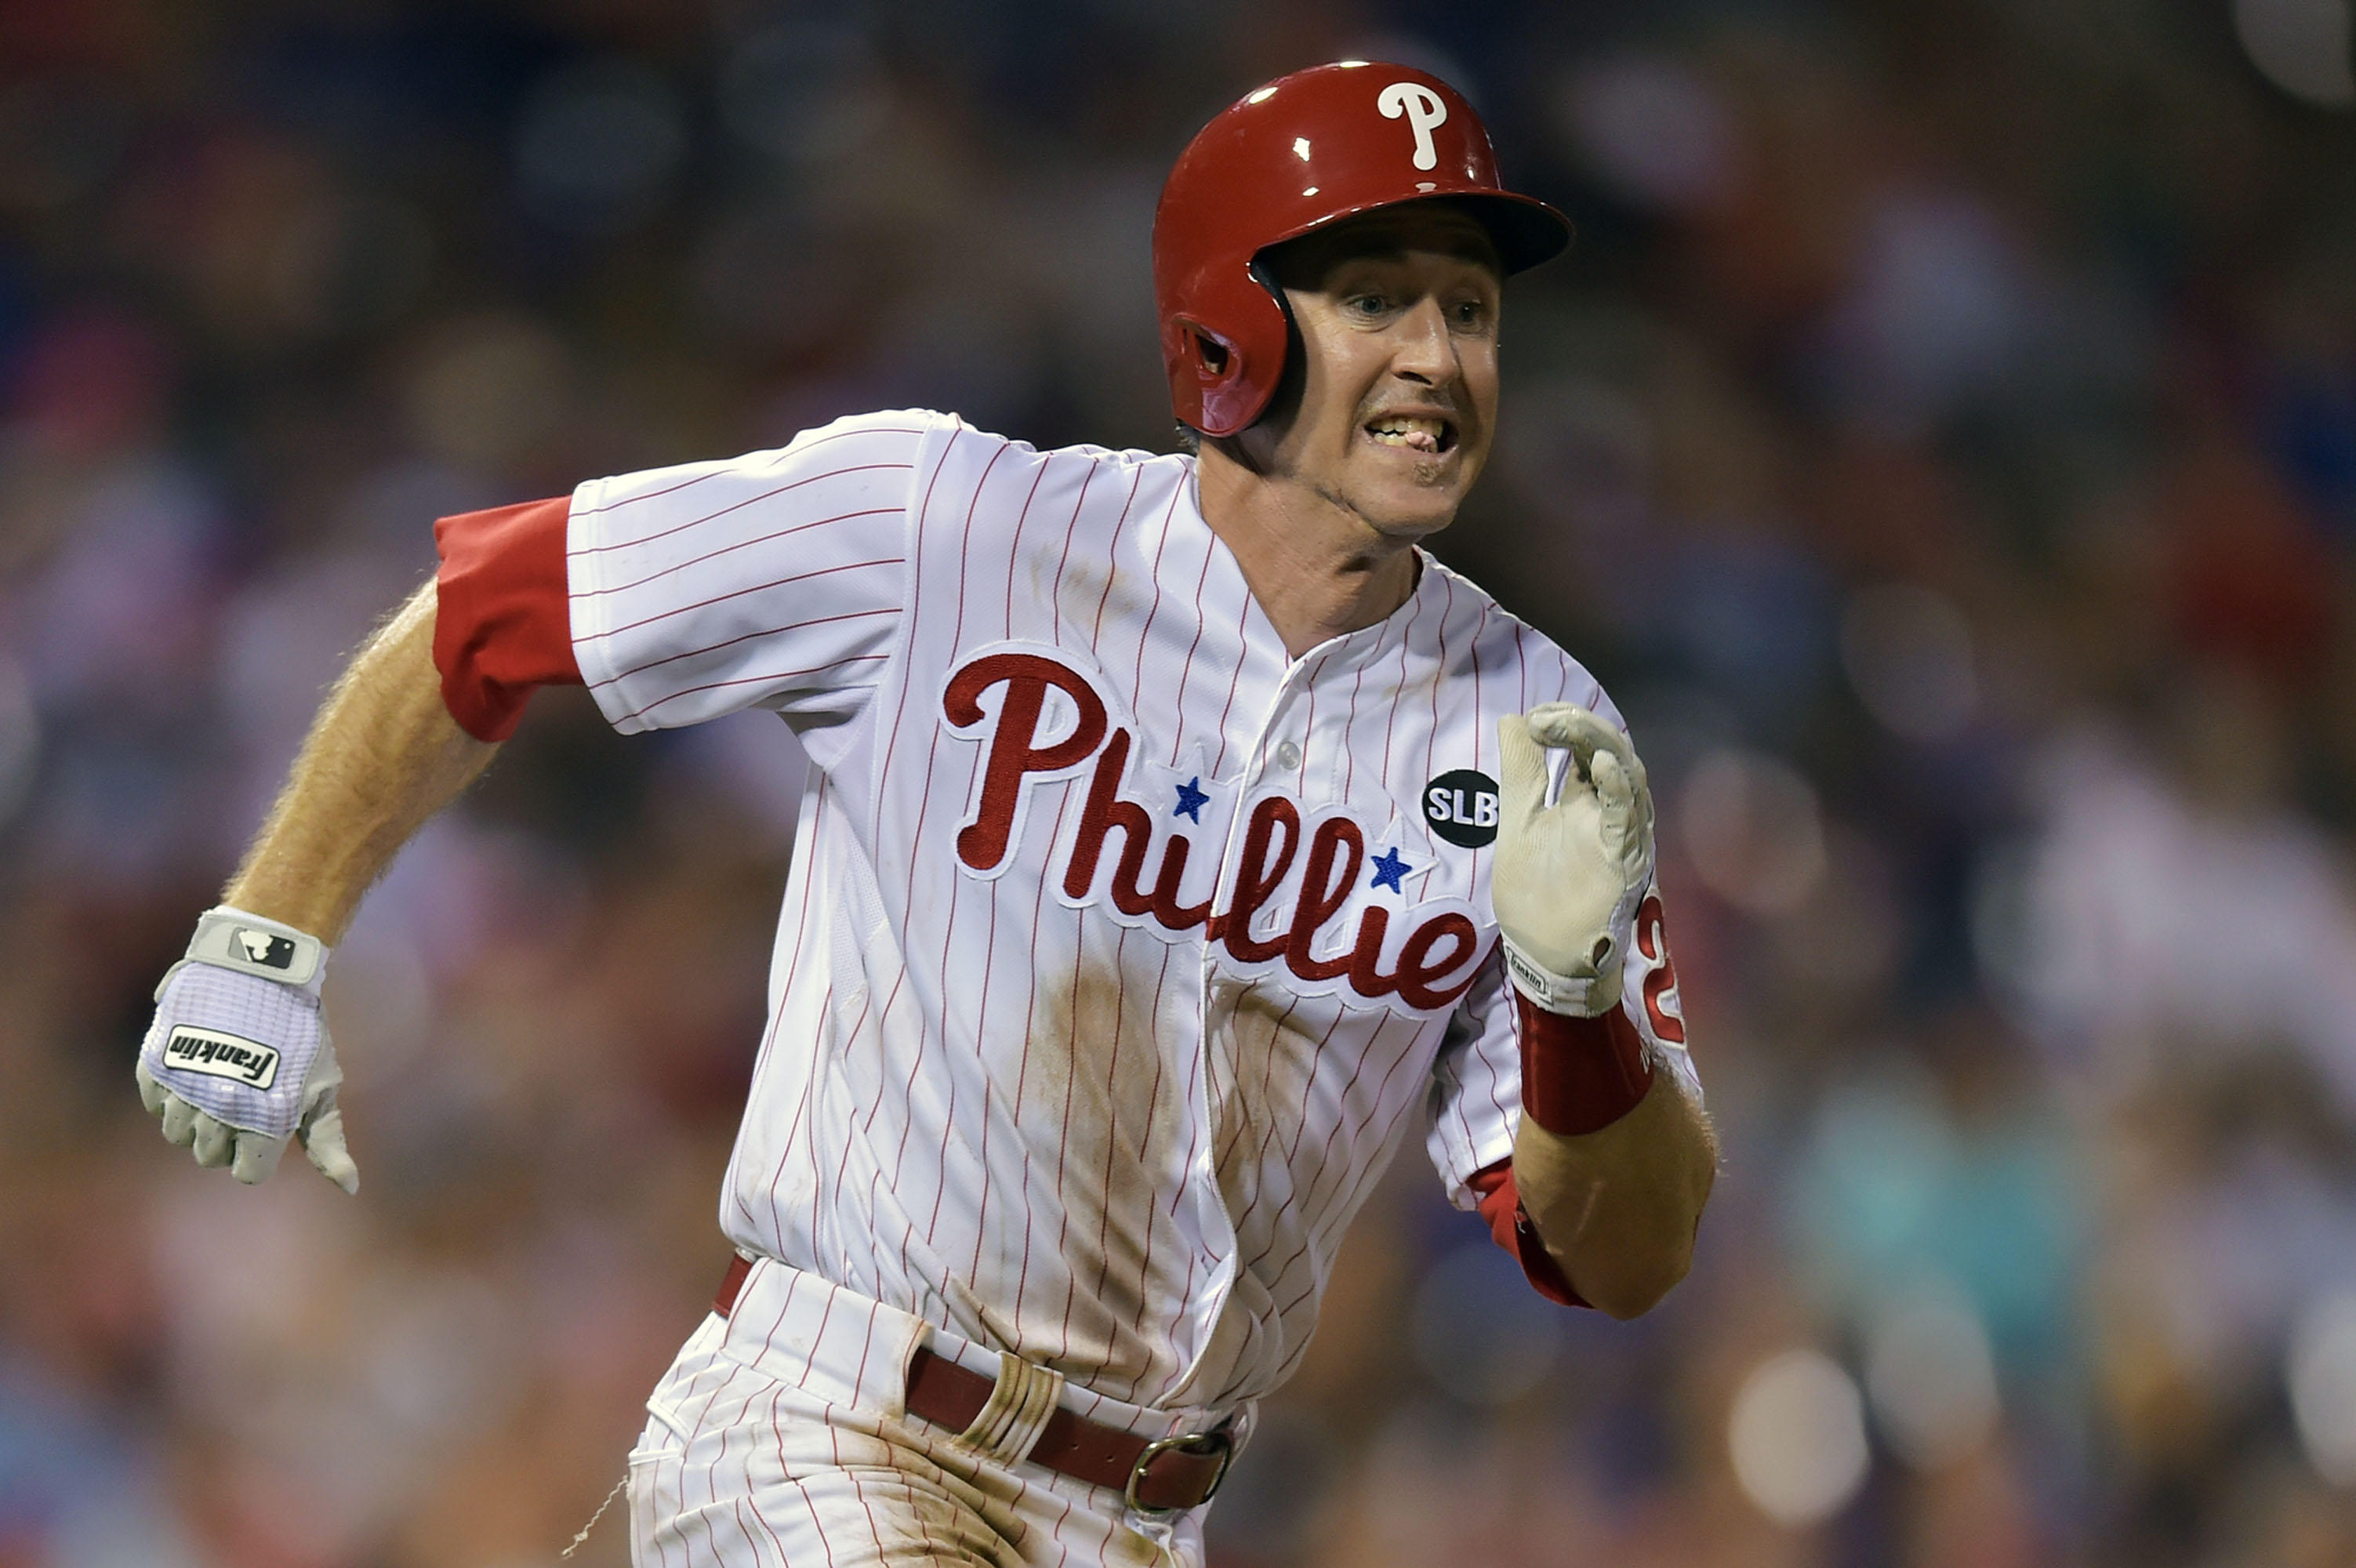 Chase Utley Traded to Dodgers, Ending 13-Year Run With Phillies